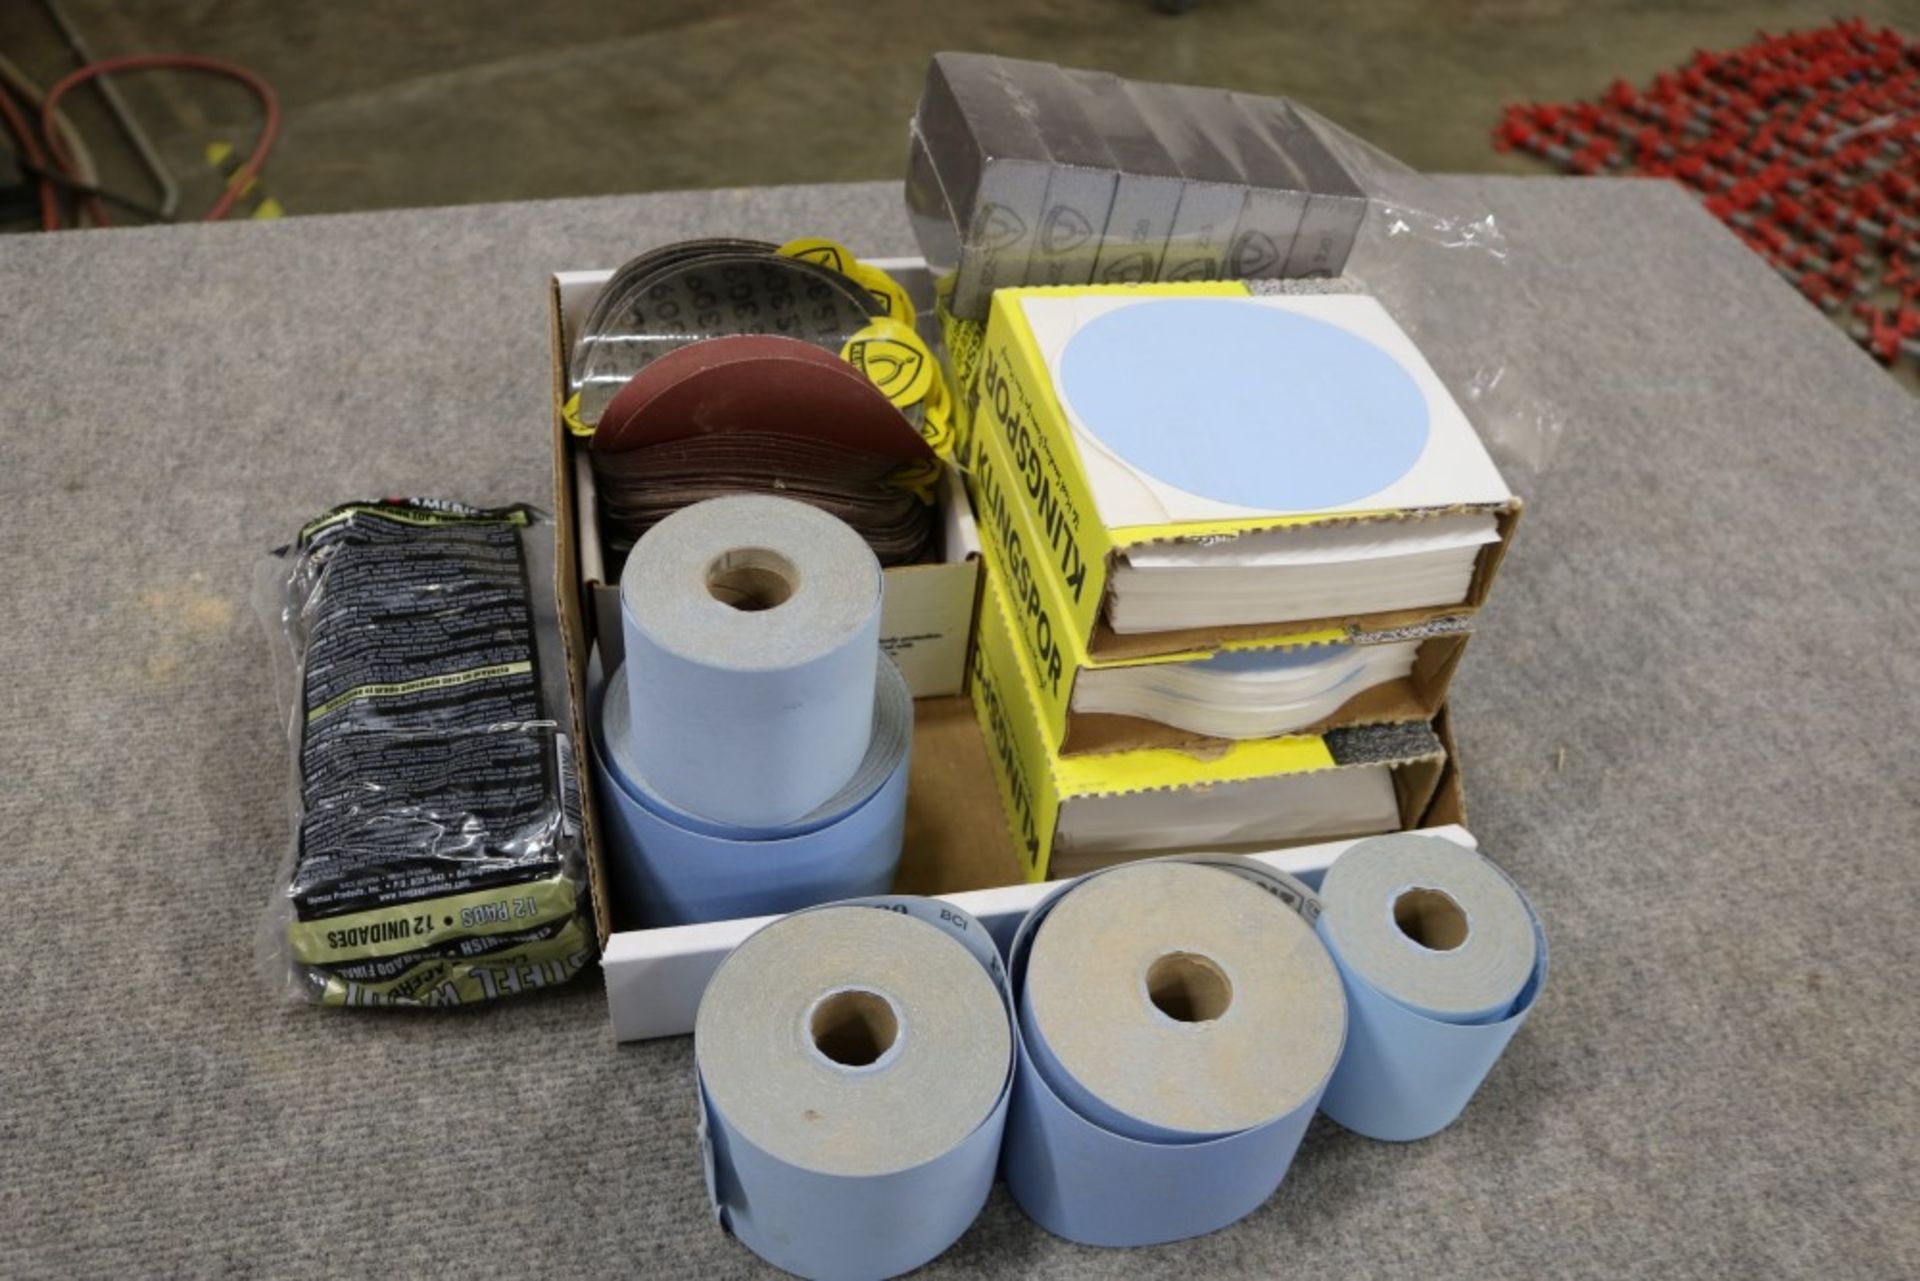 Brand New Box of Sand Paper Rolls and Replacement Orbital Sand Paper Pads and Sand Paper Sponges, - Image 2 of 5